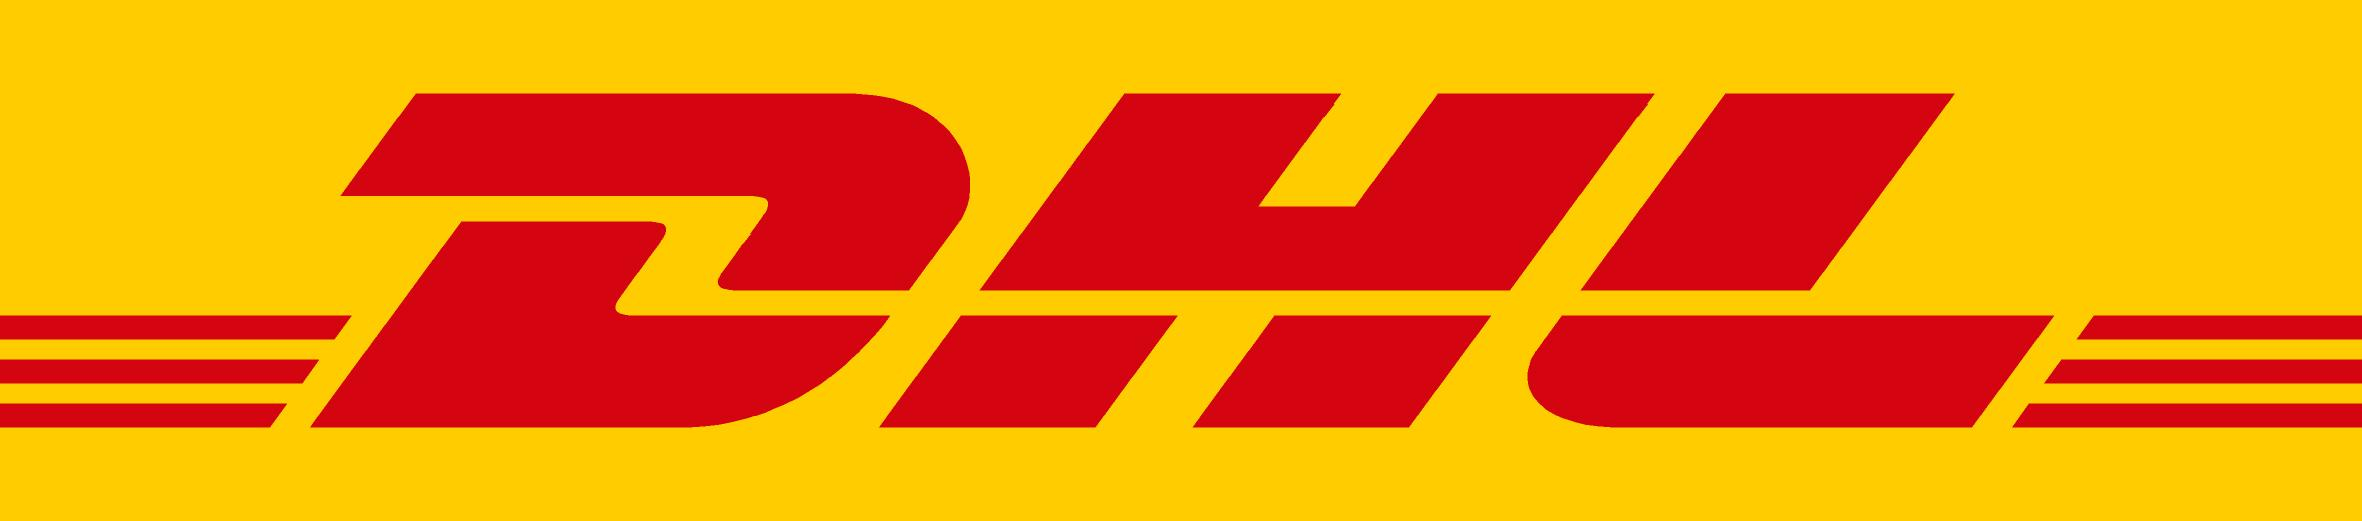 African businesses continue to reap benefits of US-Africa trade agreement, says DHL